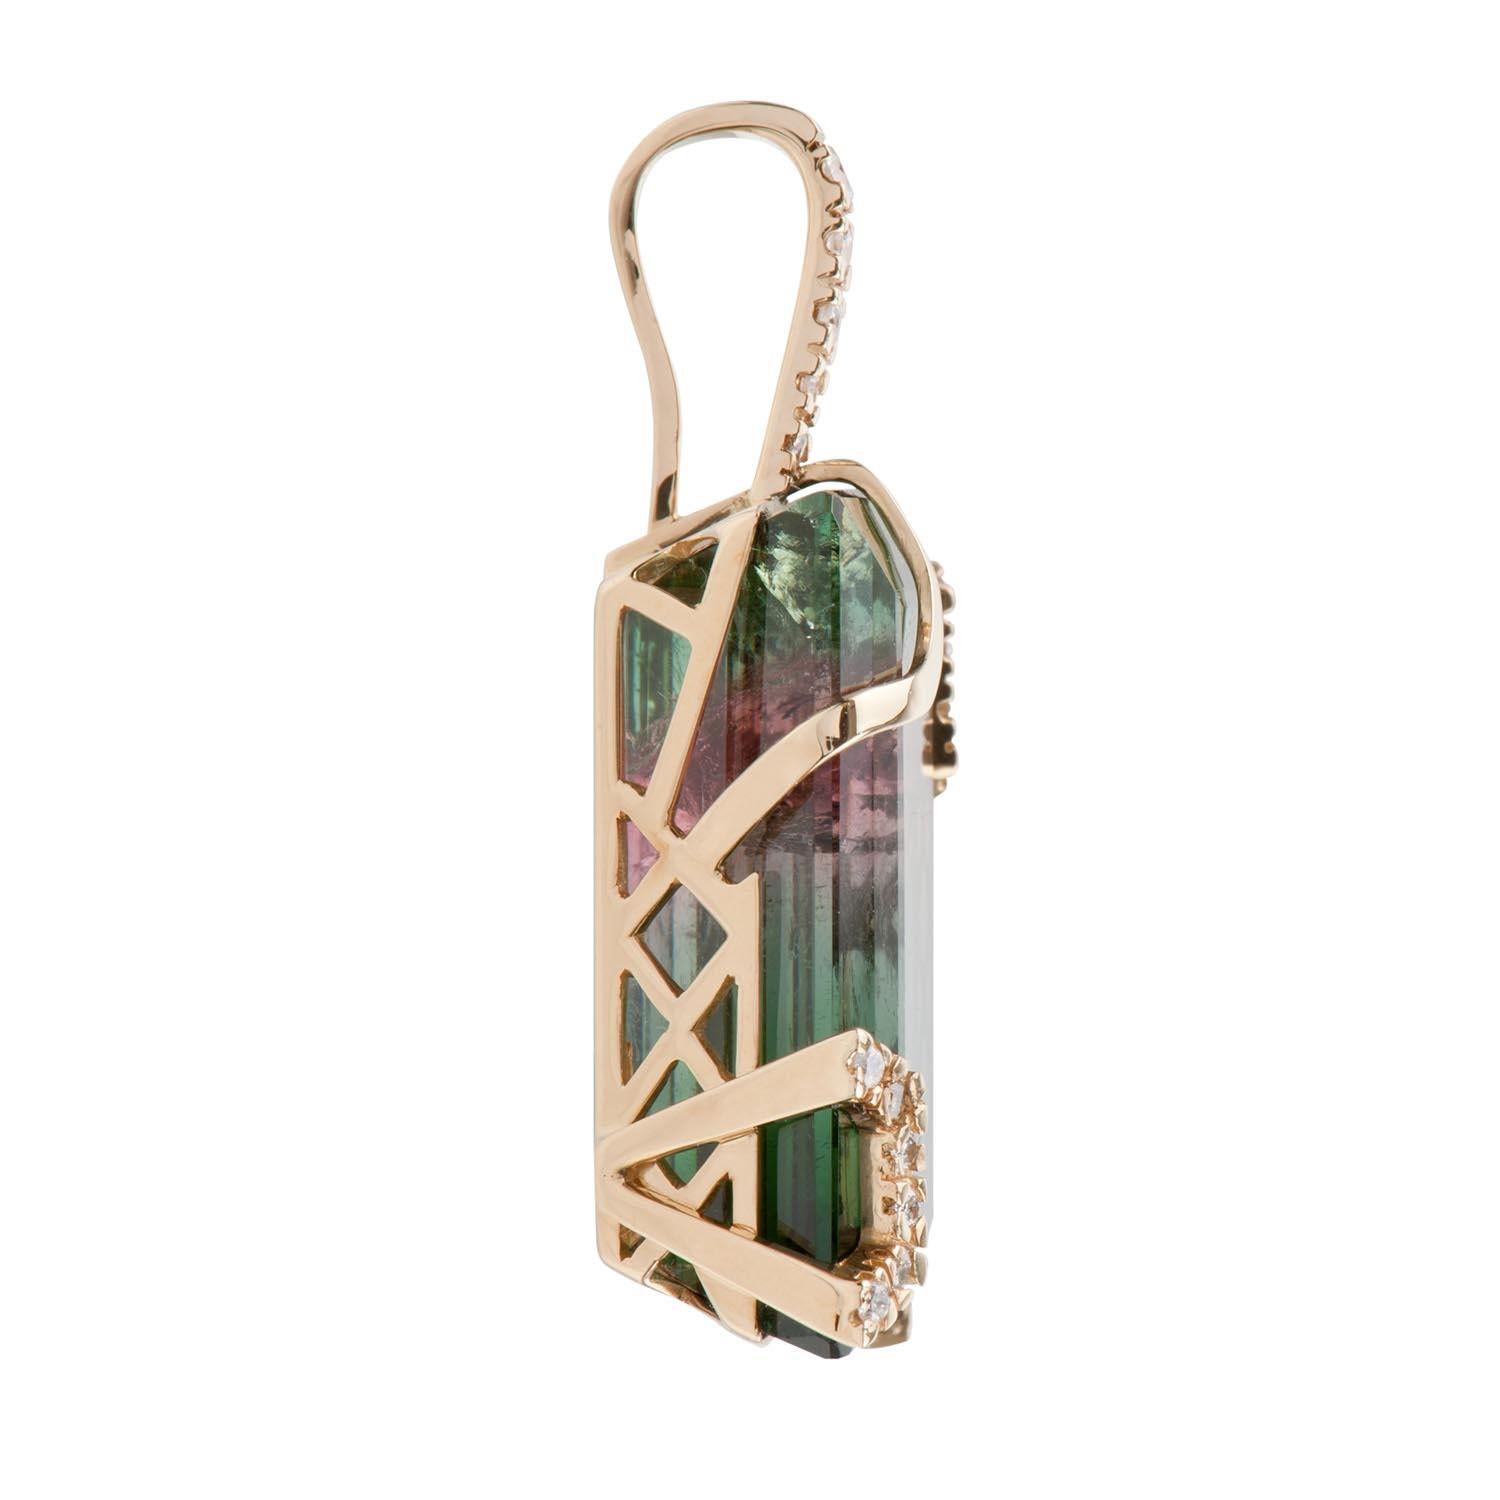 The Tourmaline Pendant has been crafted with a beautiful gemstone (26.82cts) and solid 18k yellow gold (3.28grs). We have also used internationally graded VS2 diamonds with a total weight of 0.15cts.

It is a unique and versatile piece that can